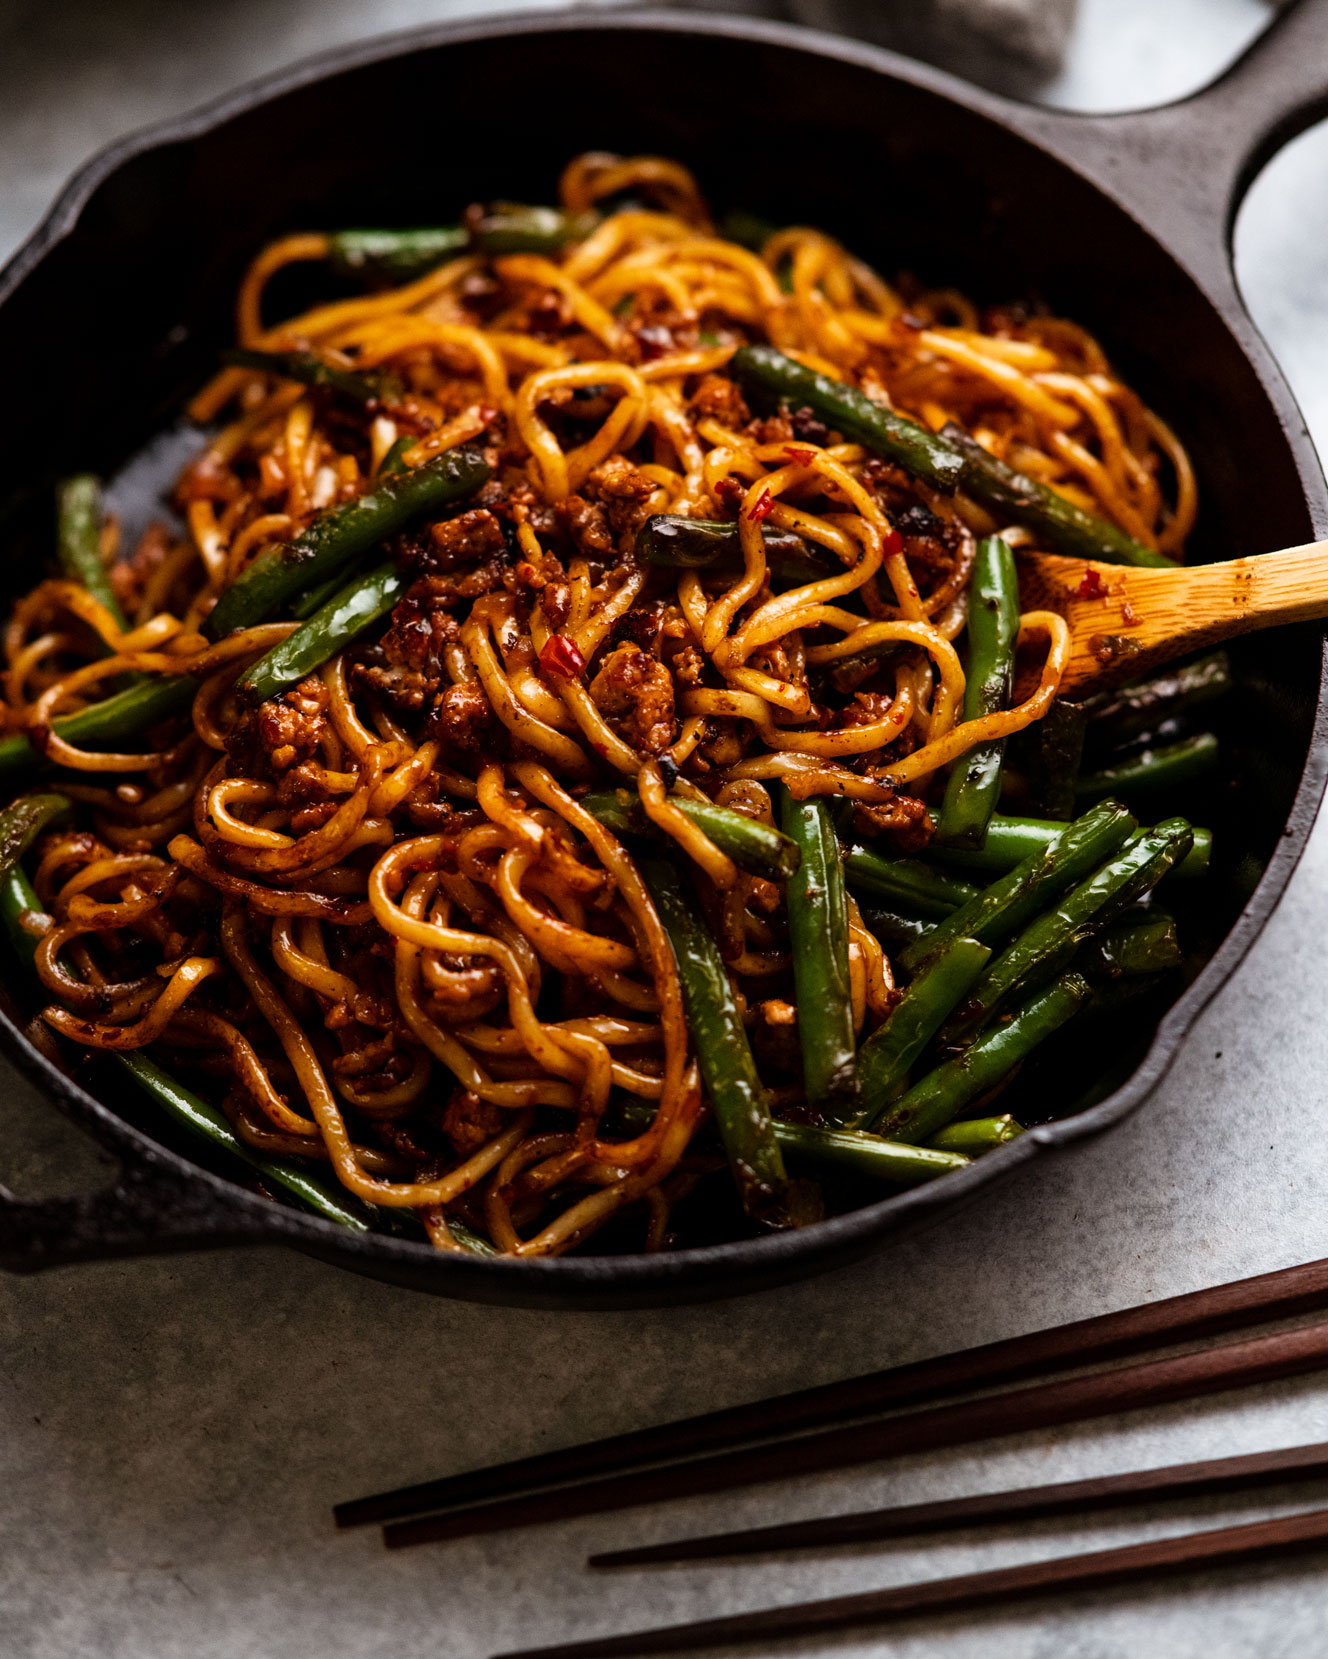 Spicy Sichuan Noodles from RecipeTin Eats cookbook "Dinner" by Nagi Maehashi